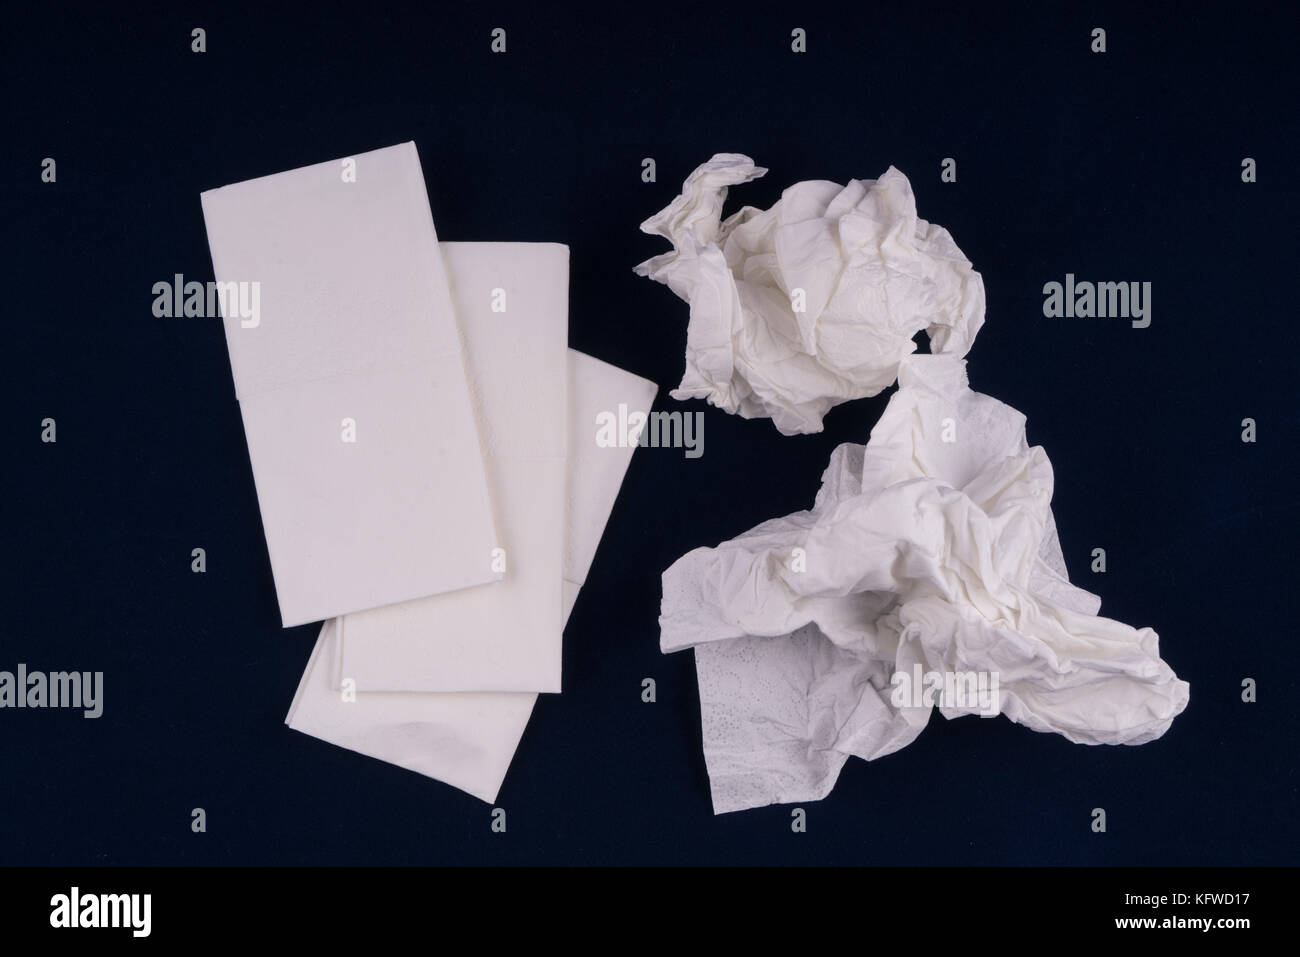 paper handkerchiefs used on the table Stock Photo